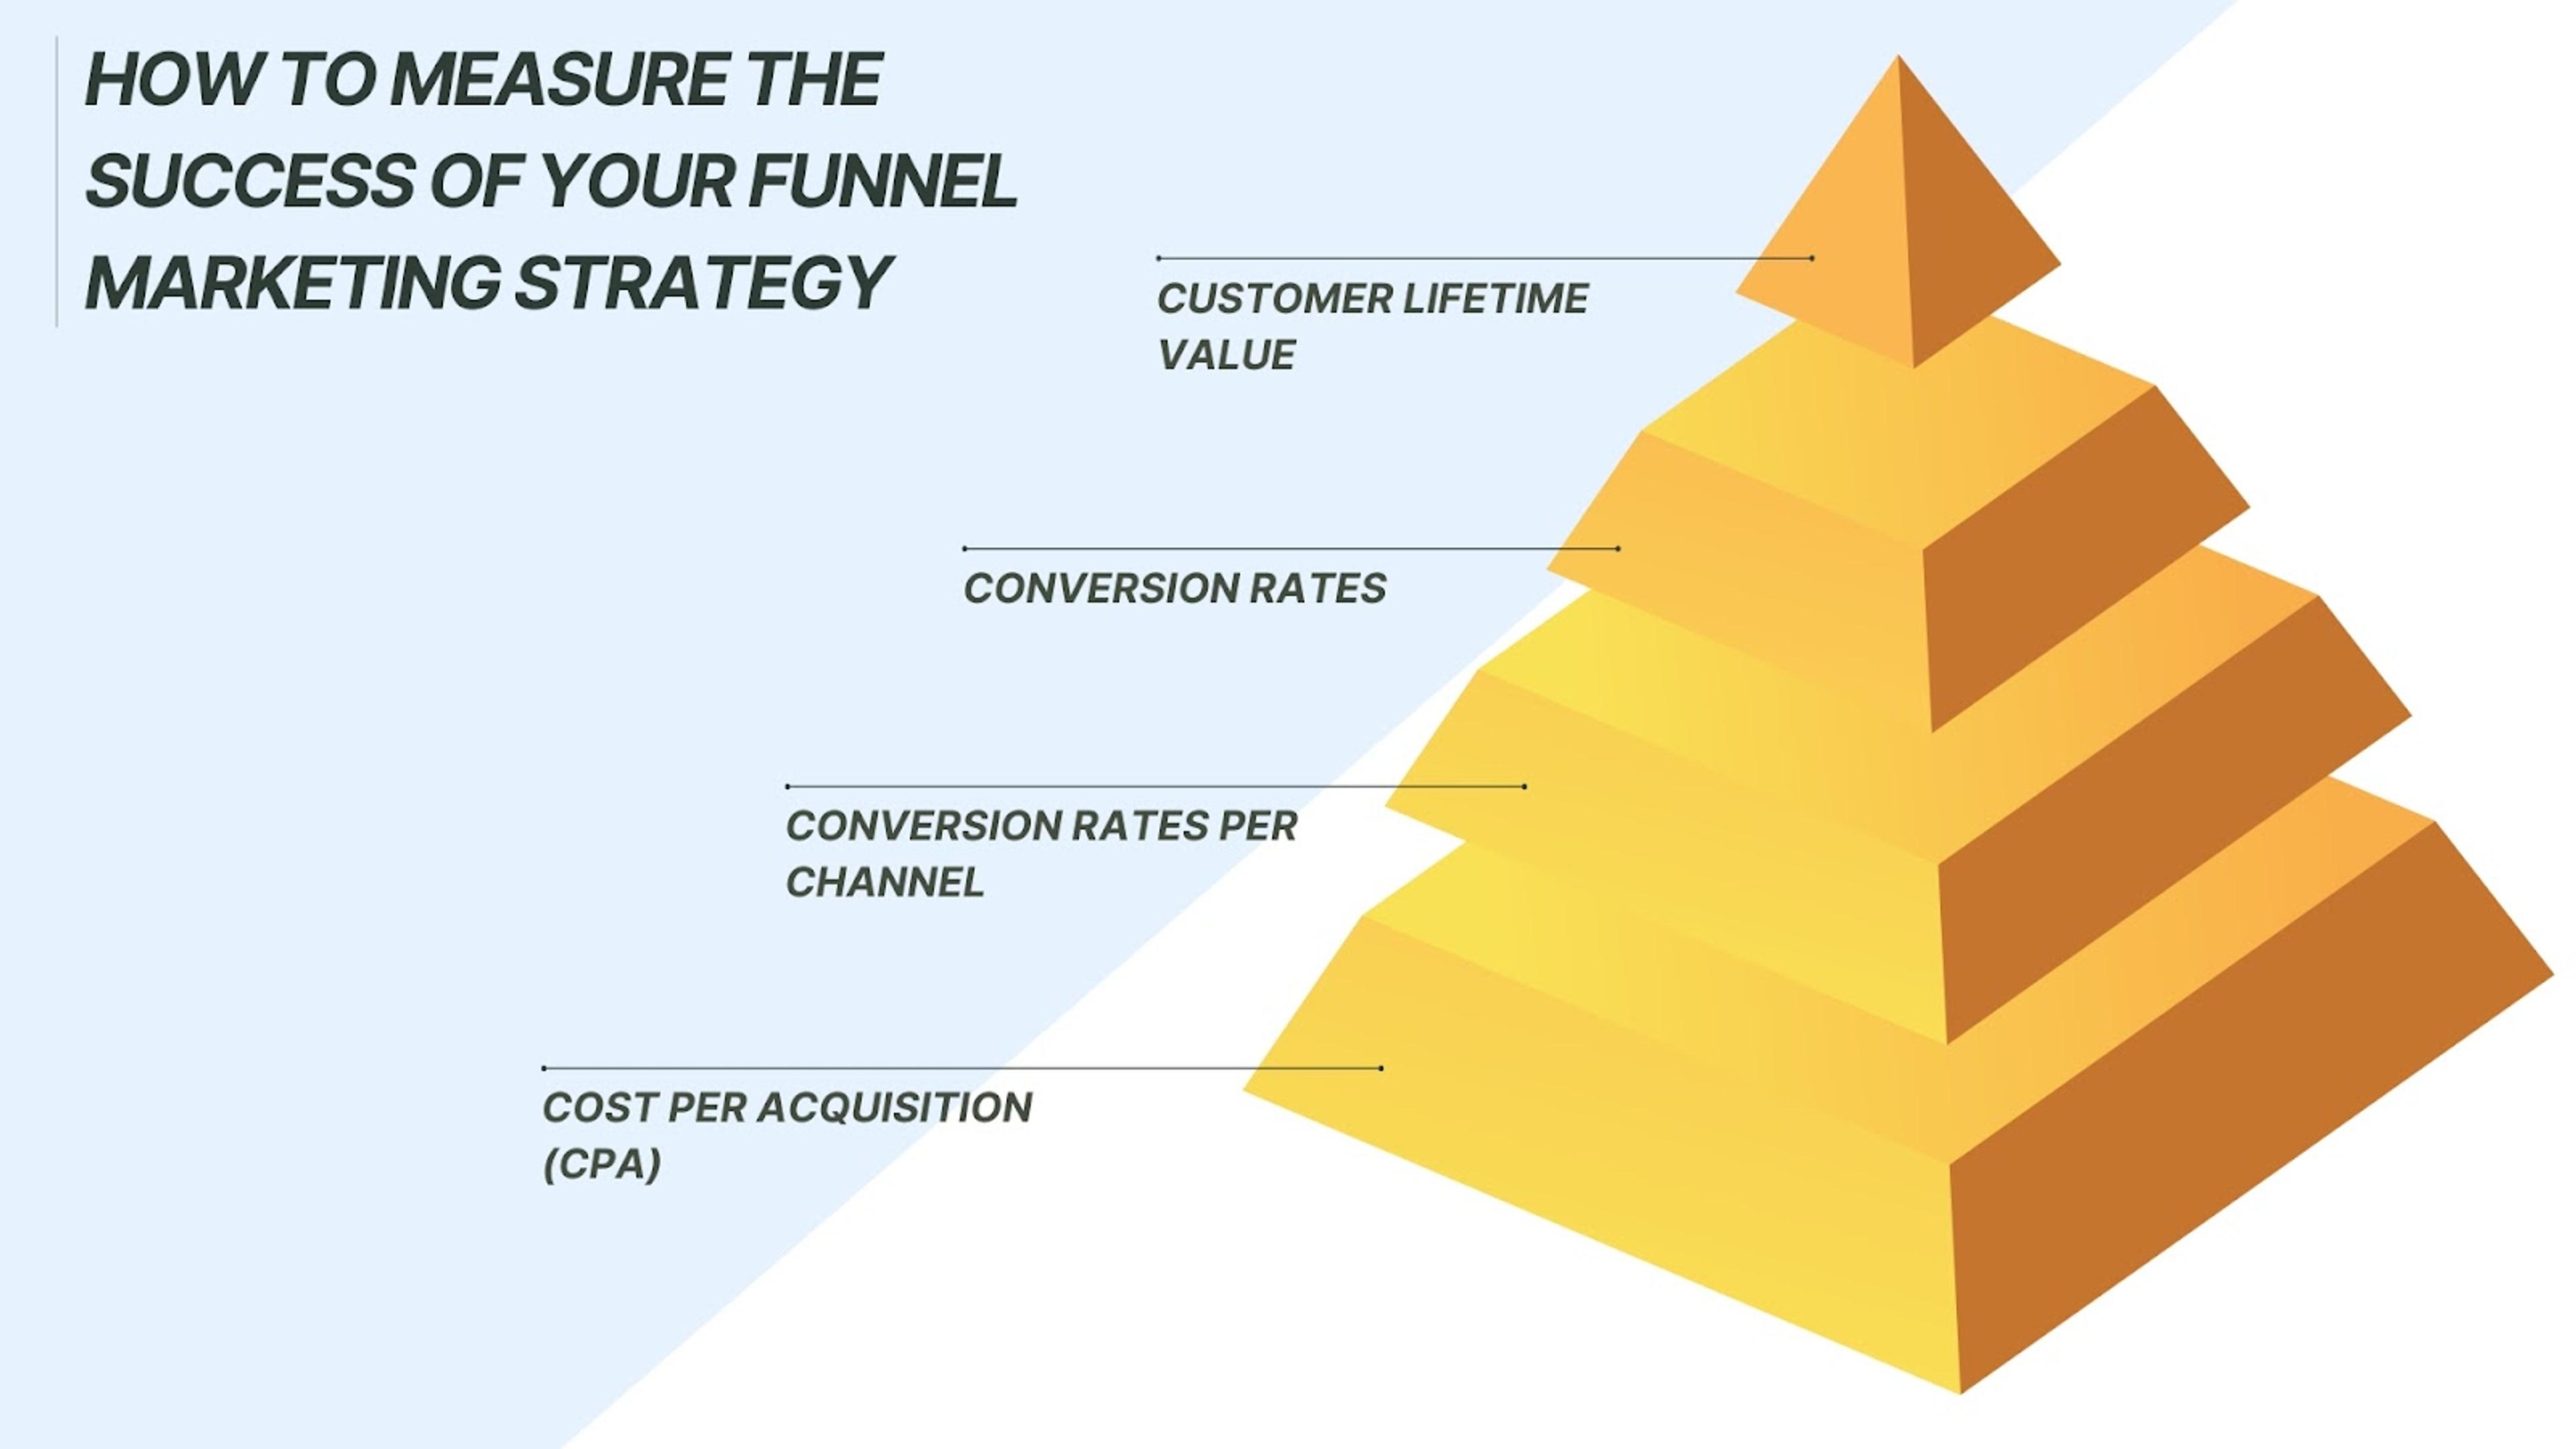 How To Measure The Success Of Your Funnel Marketing Strategy